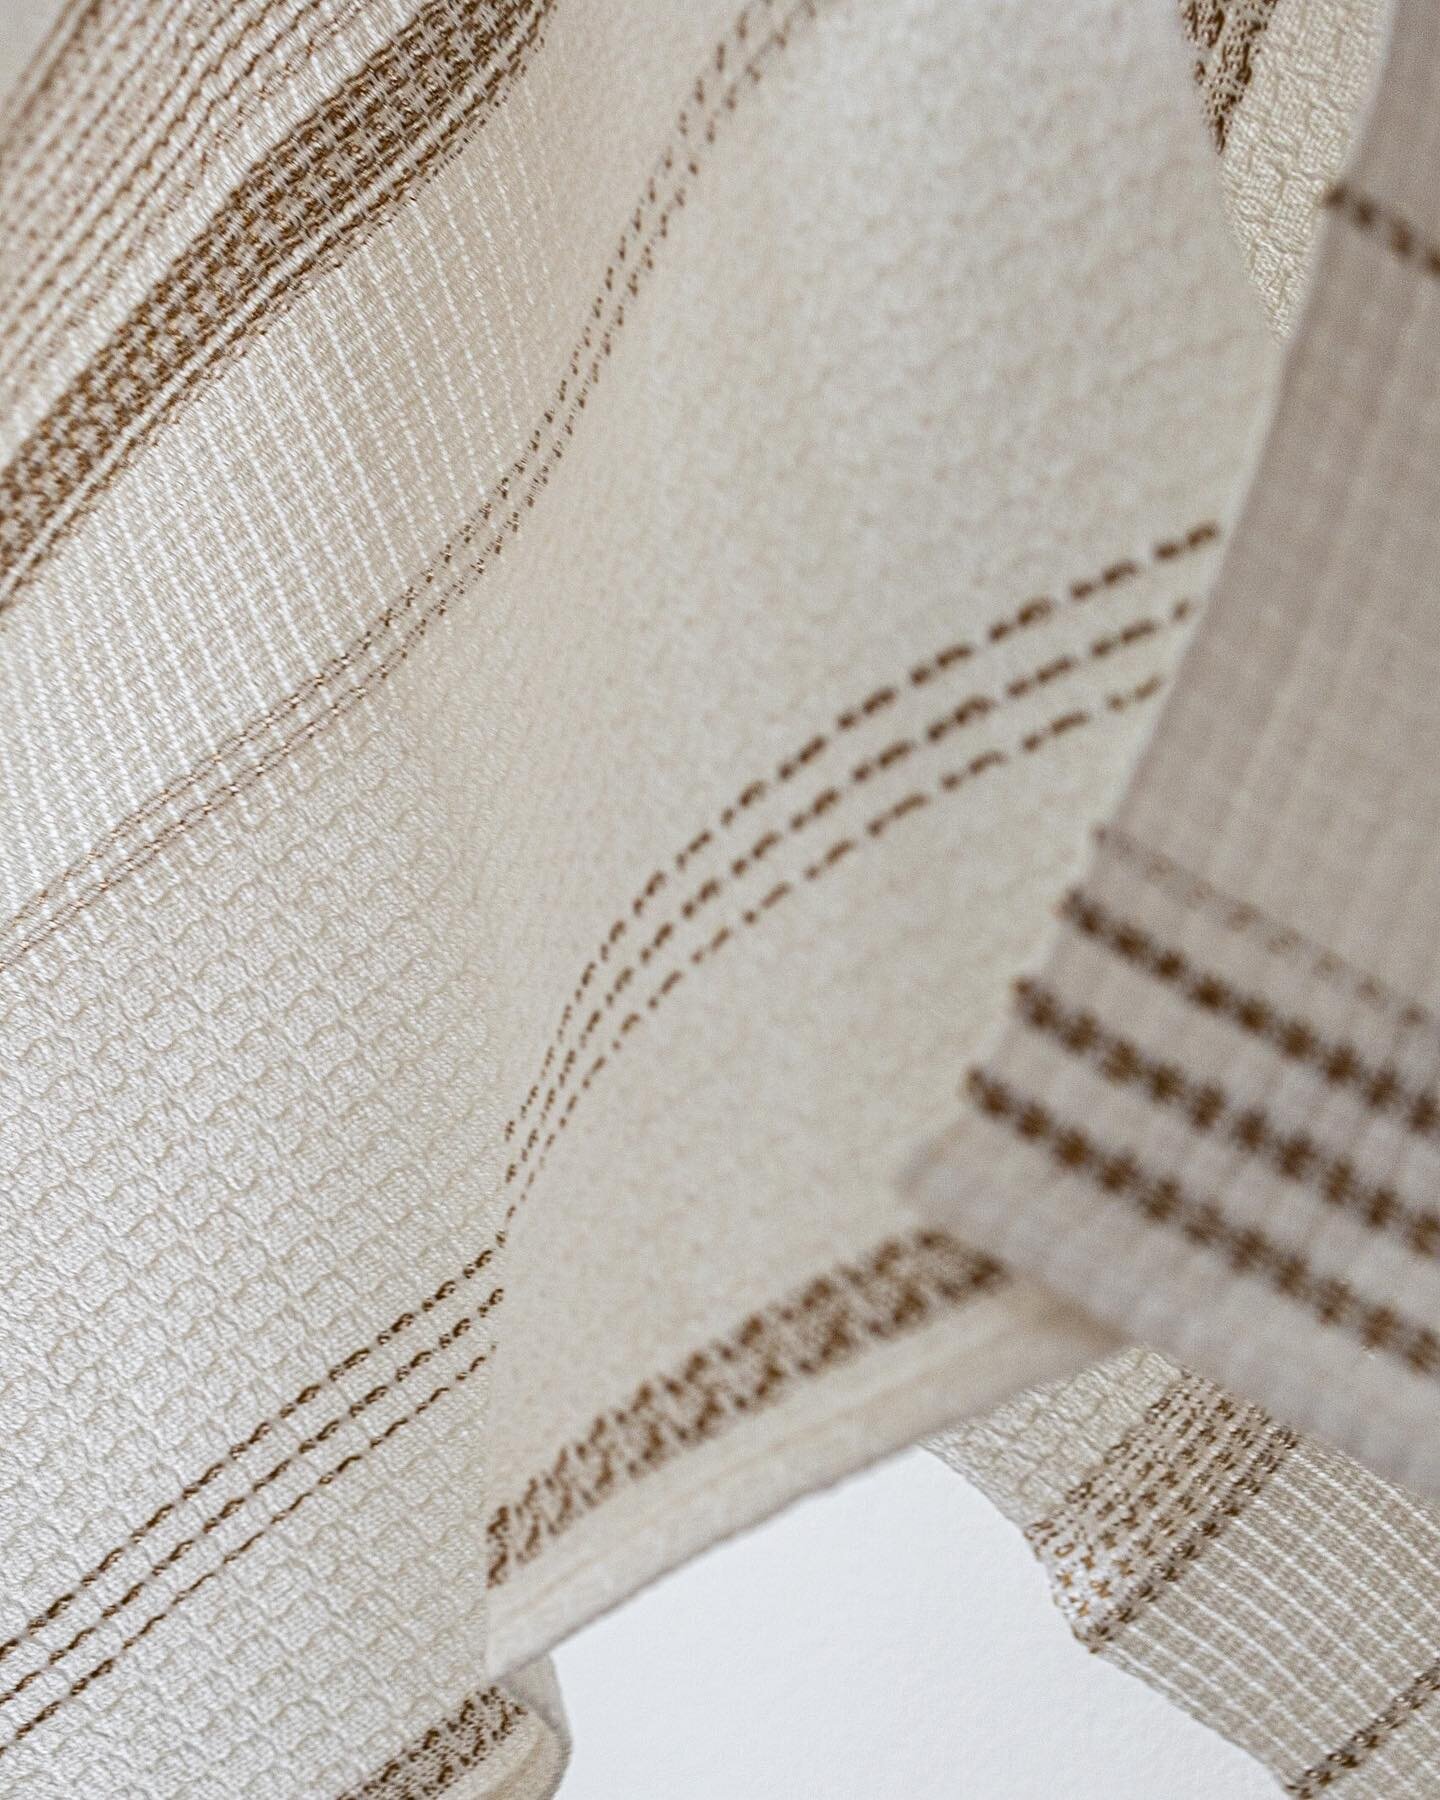 Blurry lines &bull; Linnen samples, playing around with textures and light. Researching structures for handtowels  #handwoven #textiles #samples #linnen #textures #weaving #textiledesign #madebyhand #slowdesign #handtowel